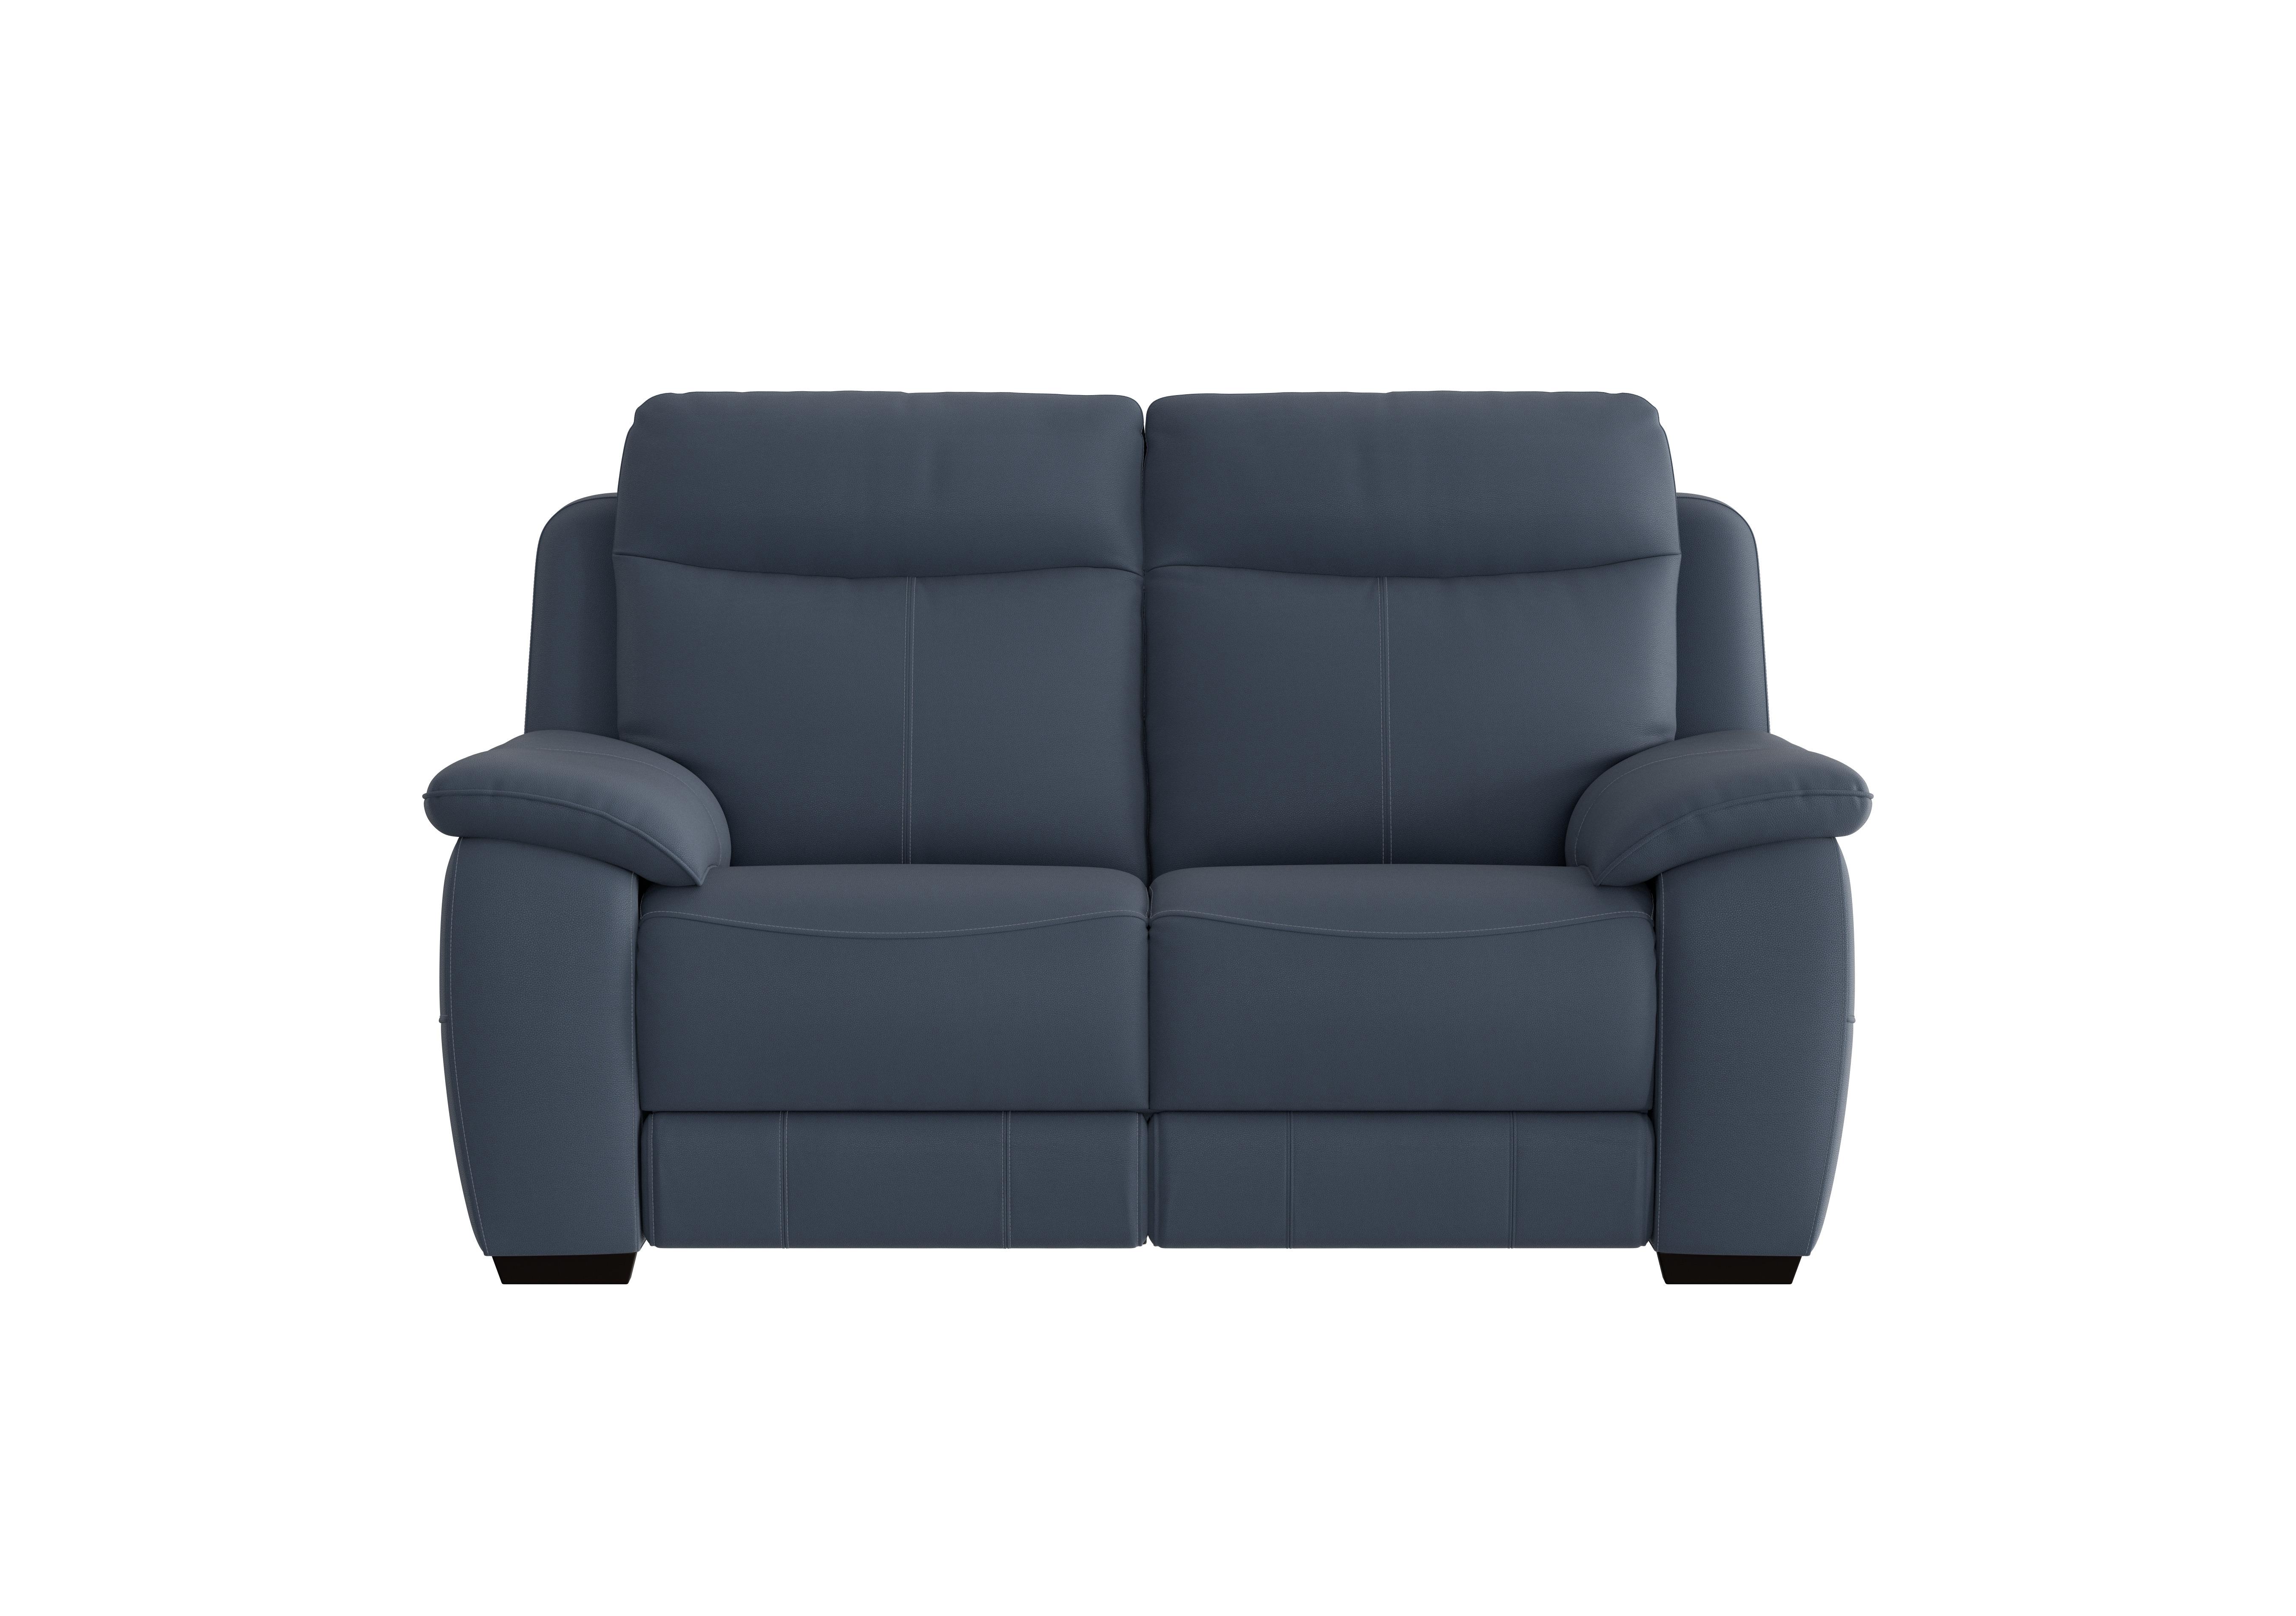 Starlight Express 2 Seater Leather Sofa in Bv-313e Ocean Blue on Furniture Village